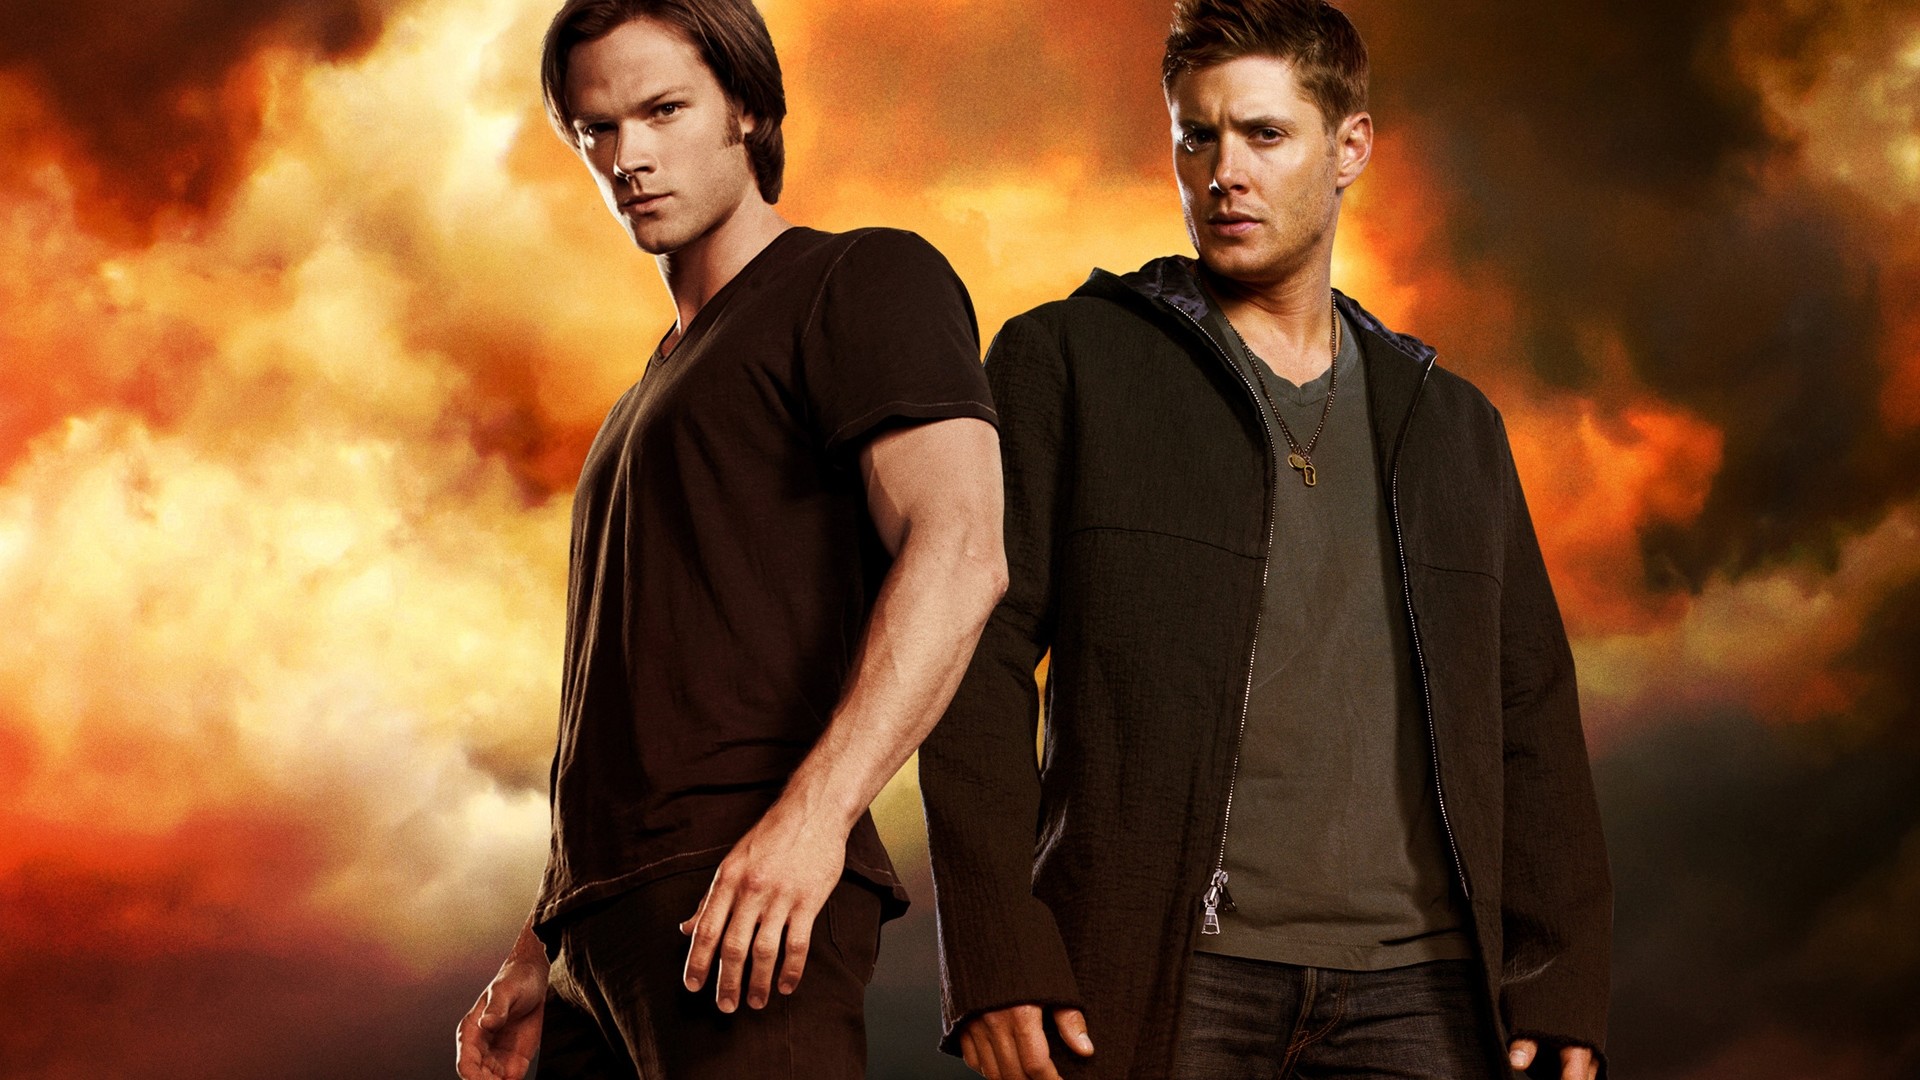 1920x1080 The best SUPERNATURAL background/ wallpaper for any device